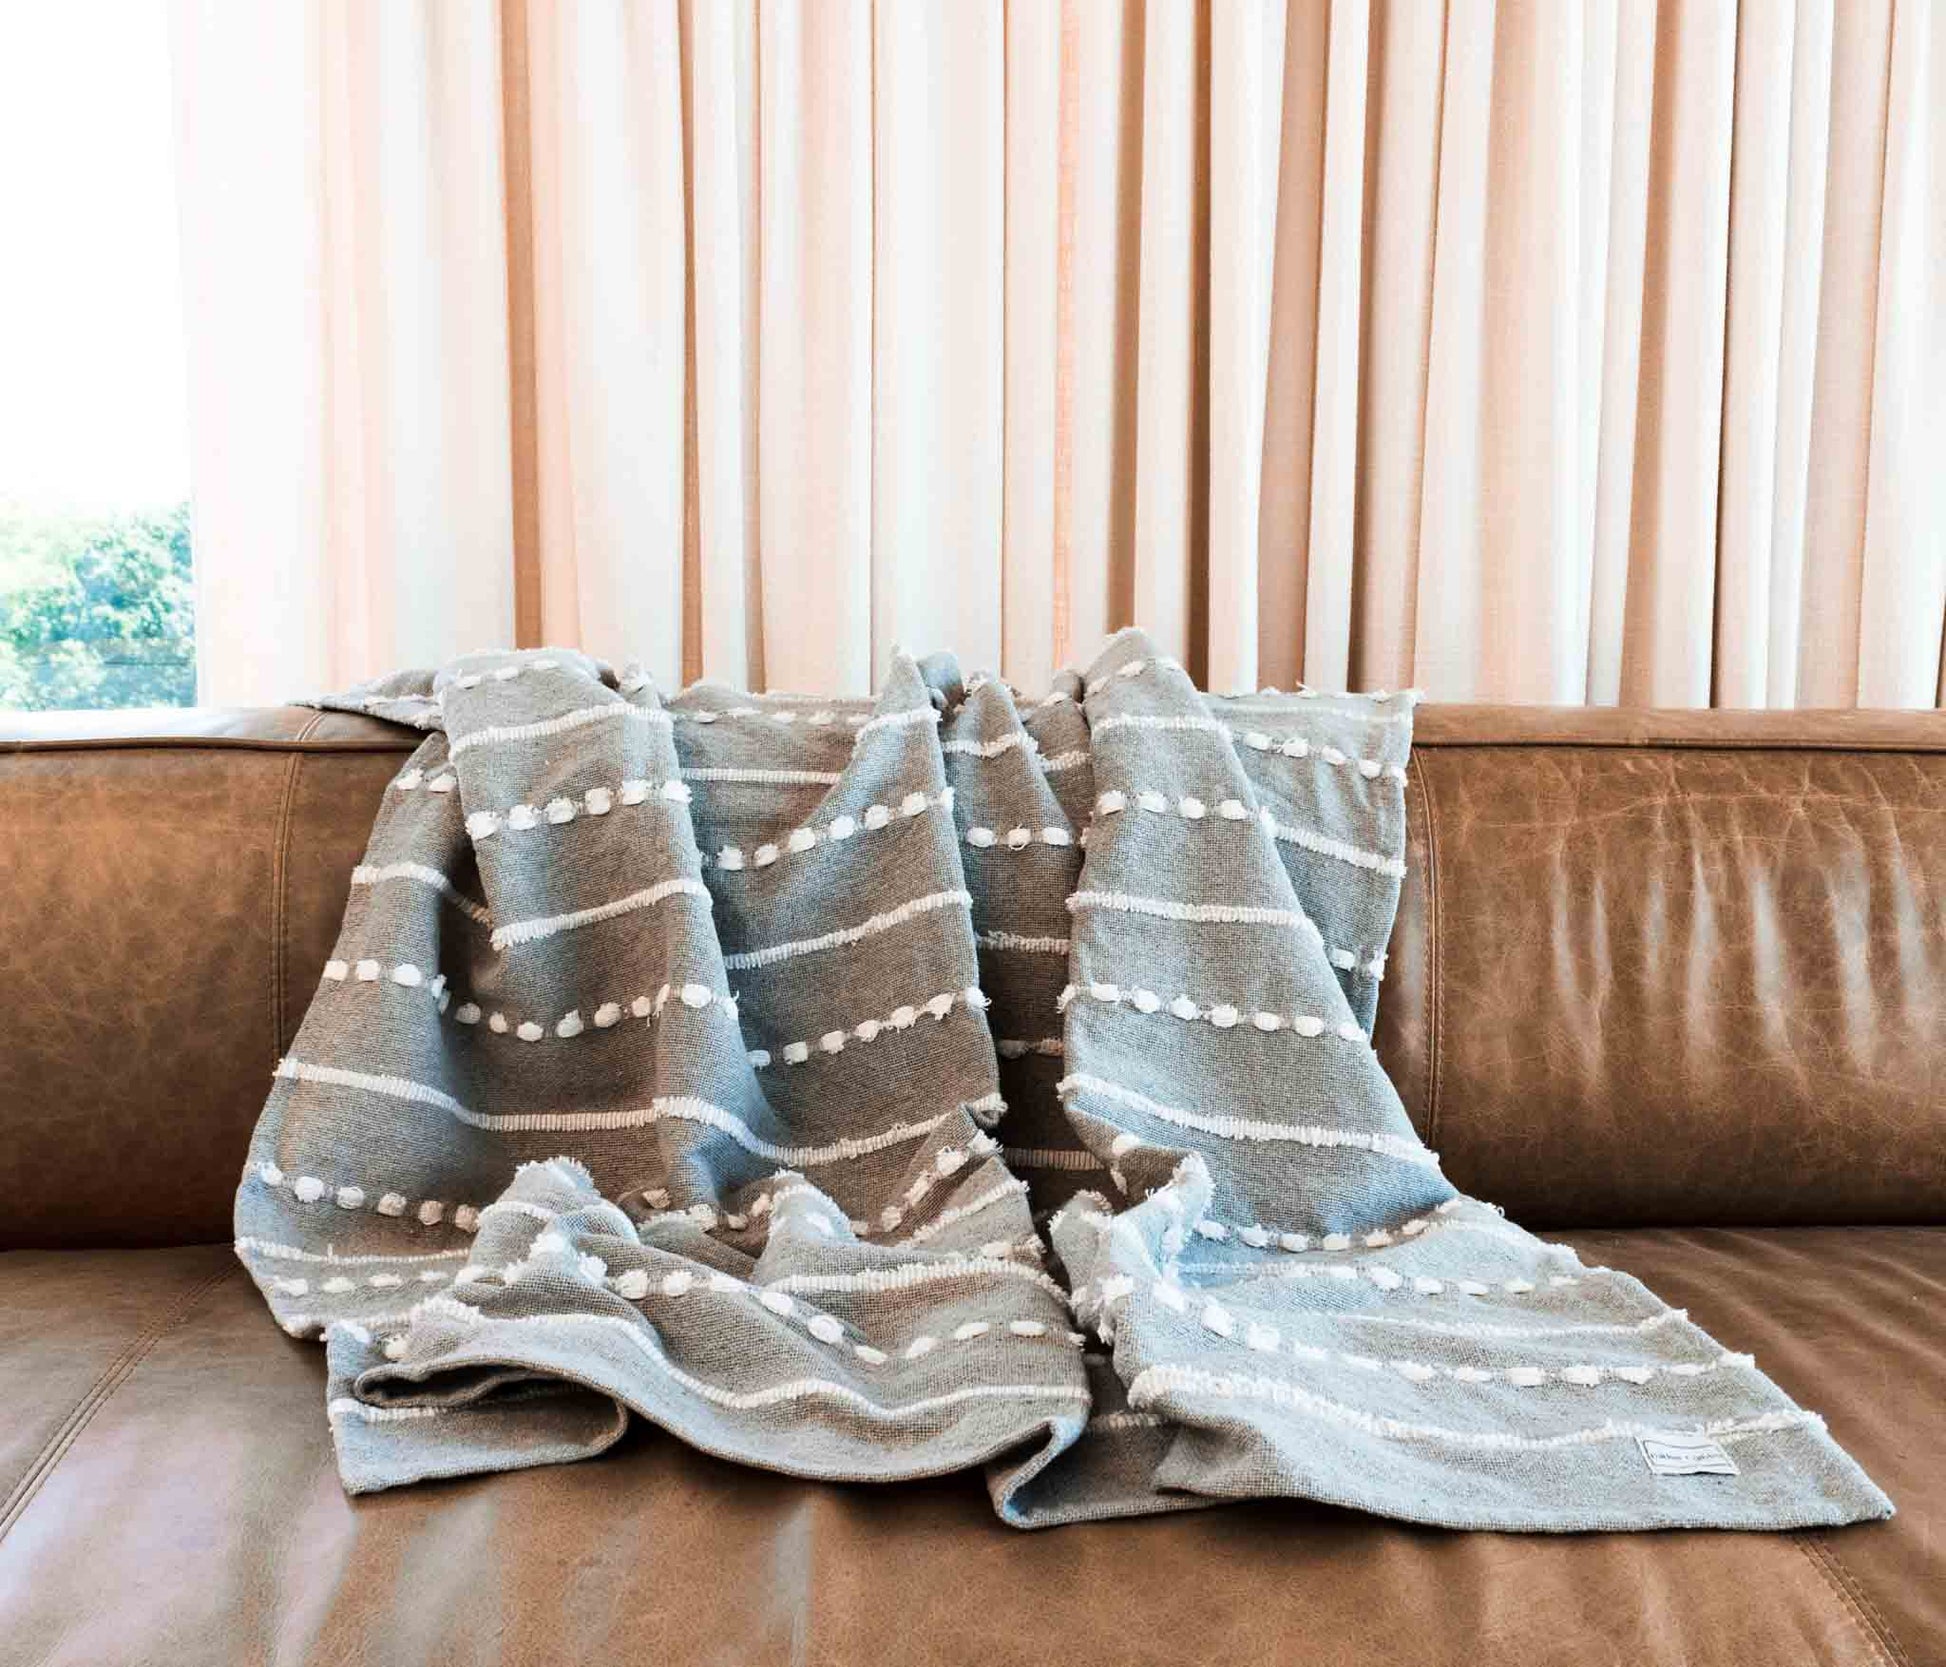 Cotton throw blanket with gray stitching and white tufted stitched stripes on leather sofa with drapery in background.